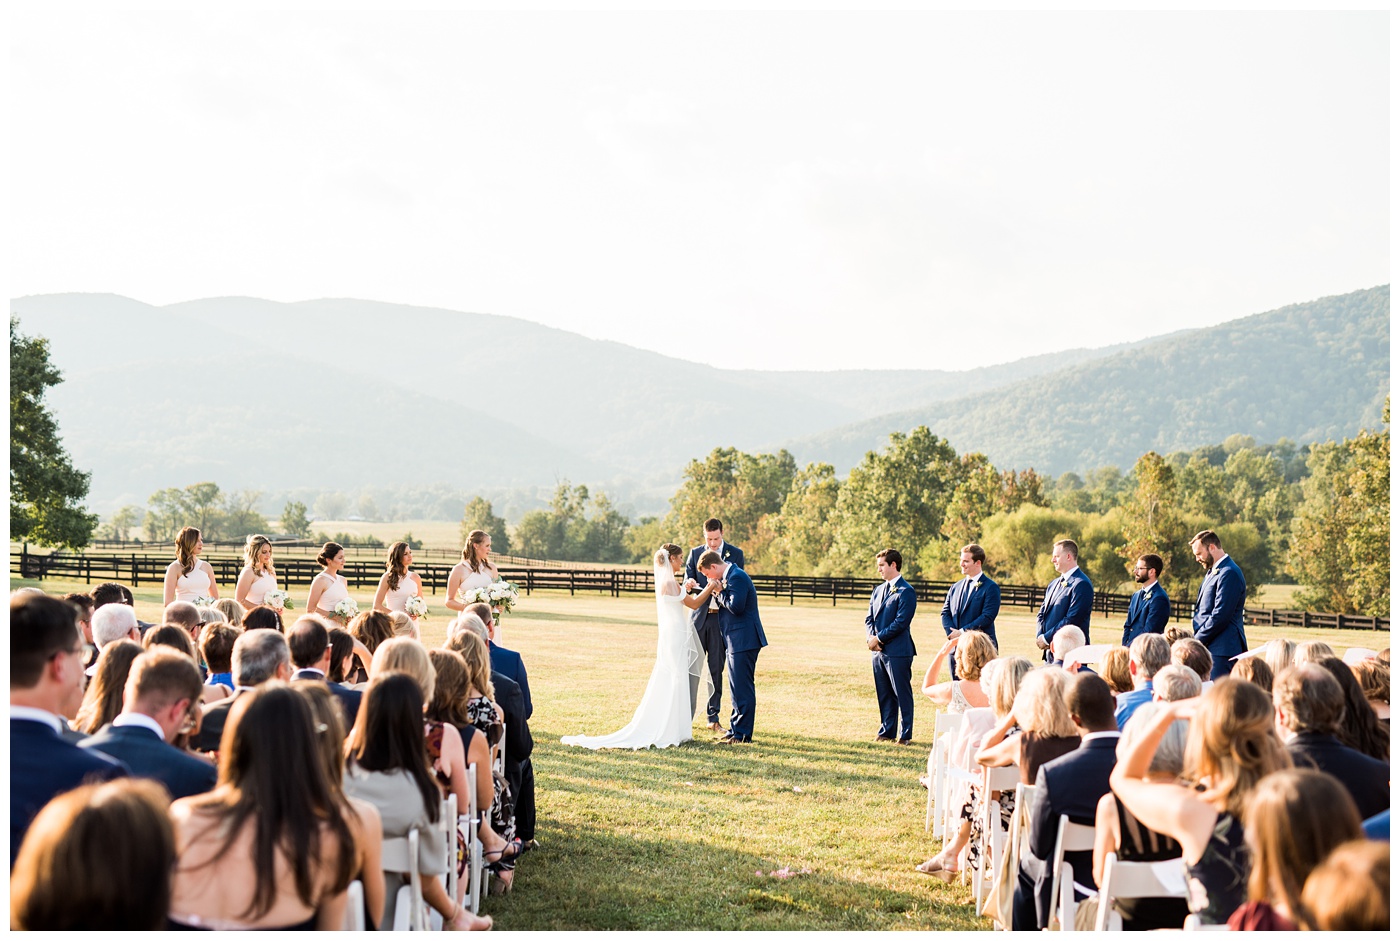 Bride and groom ceremony at King Family Vineyard.